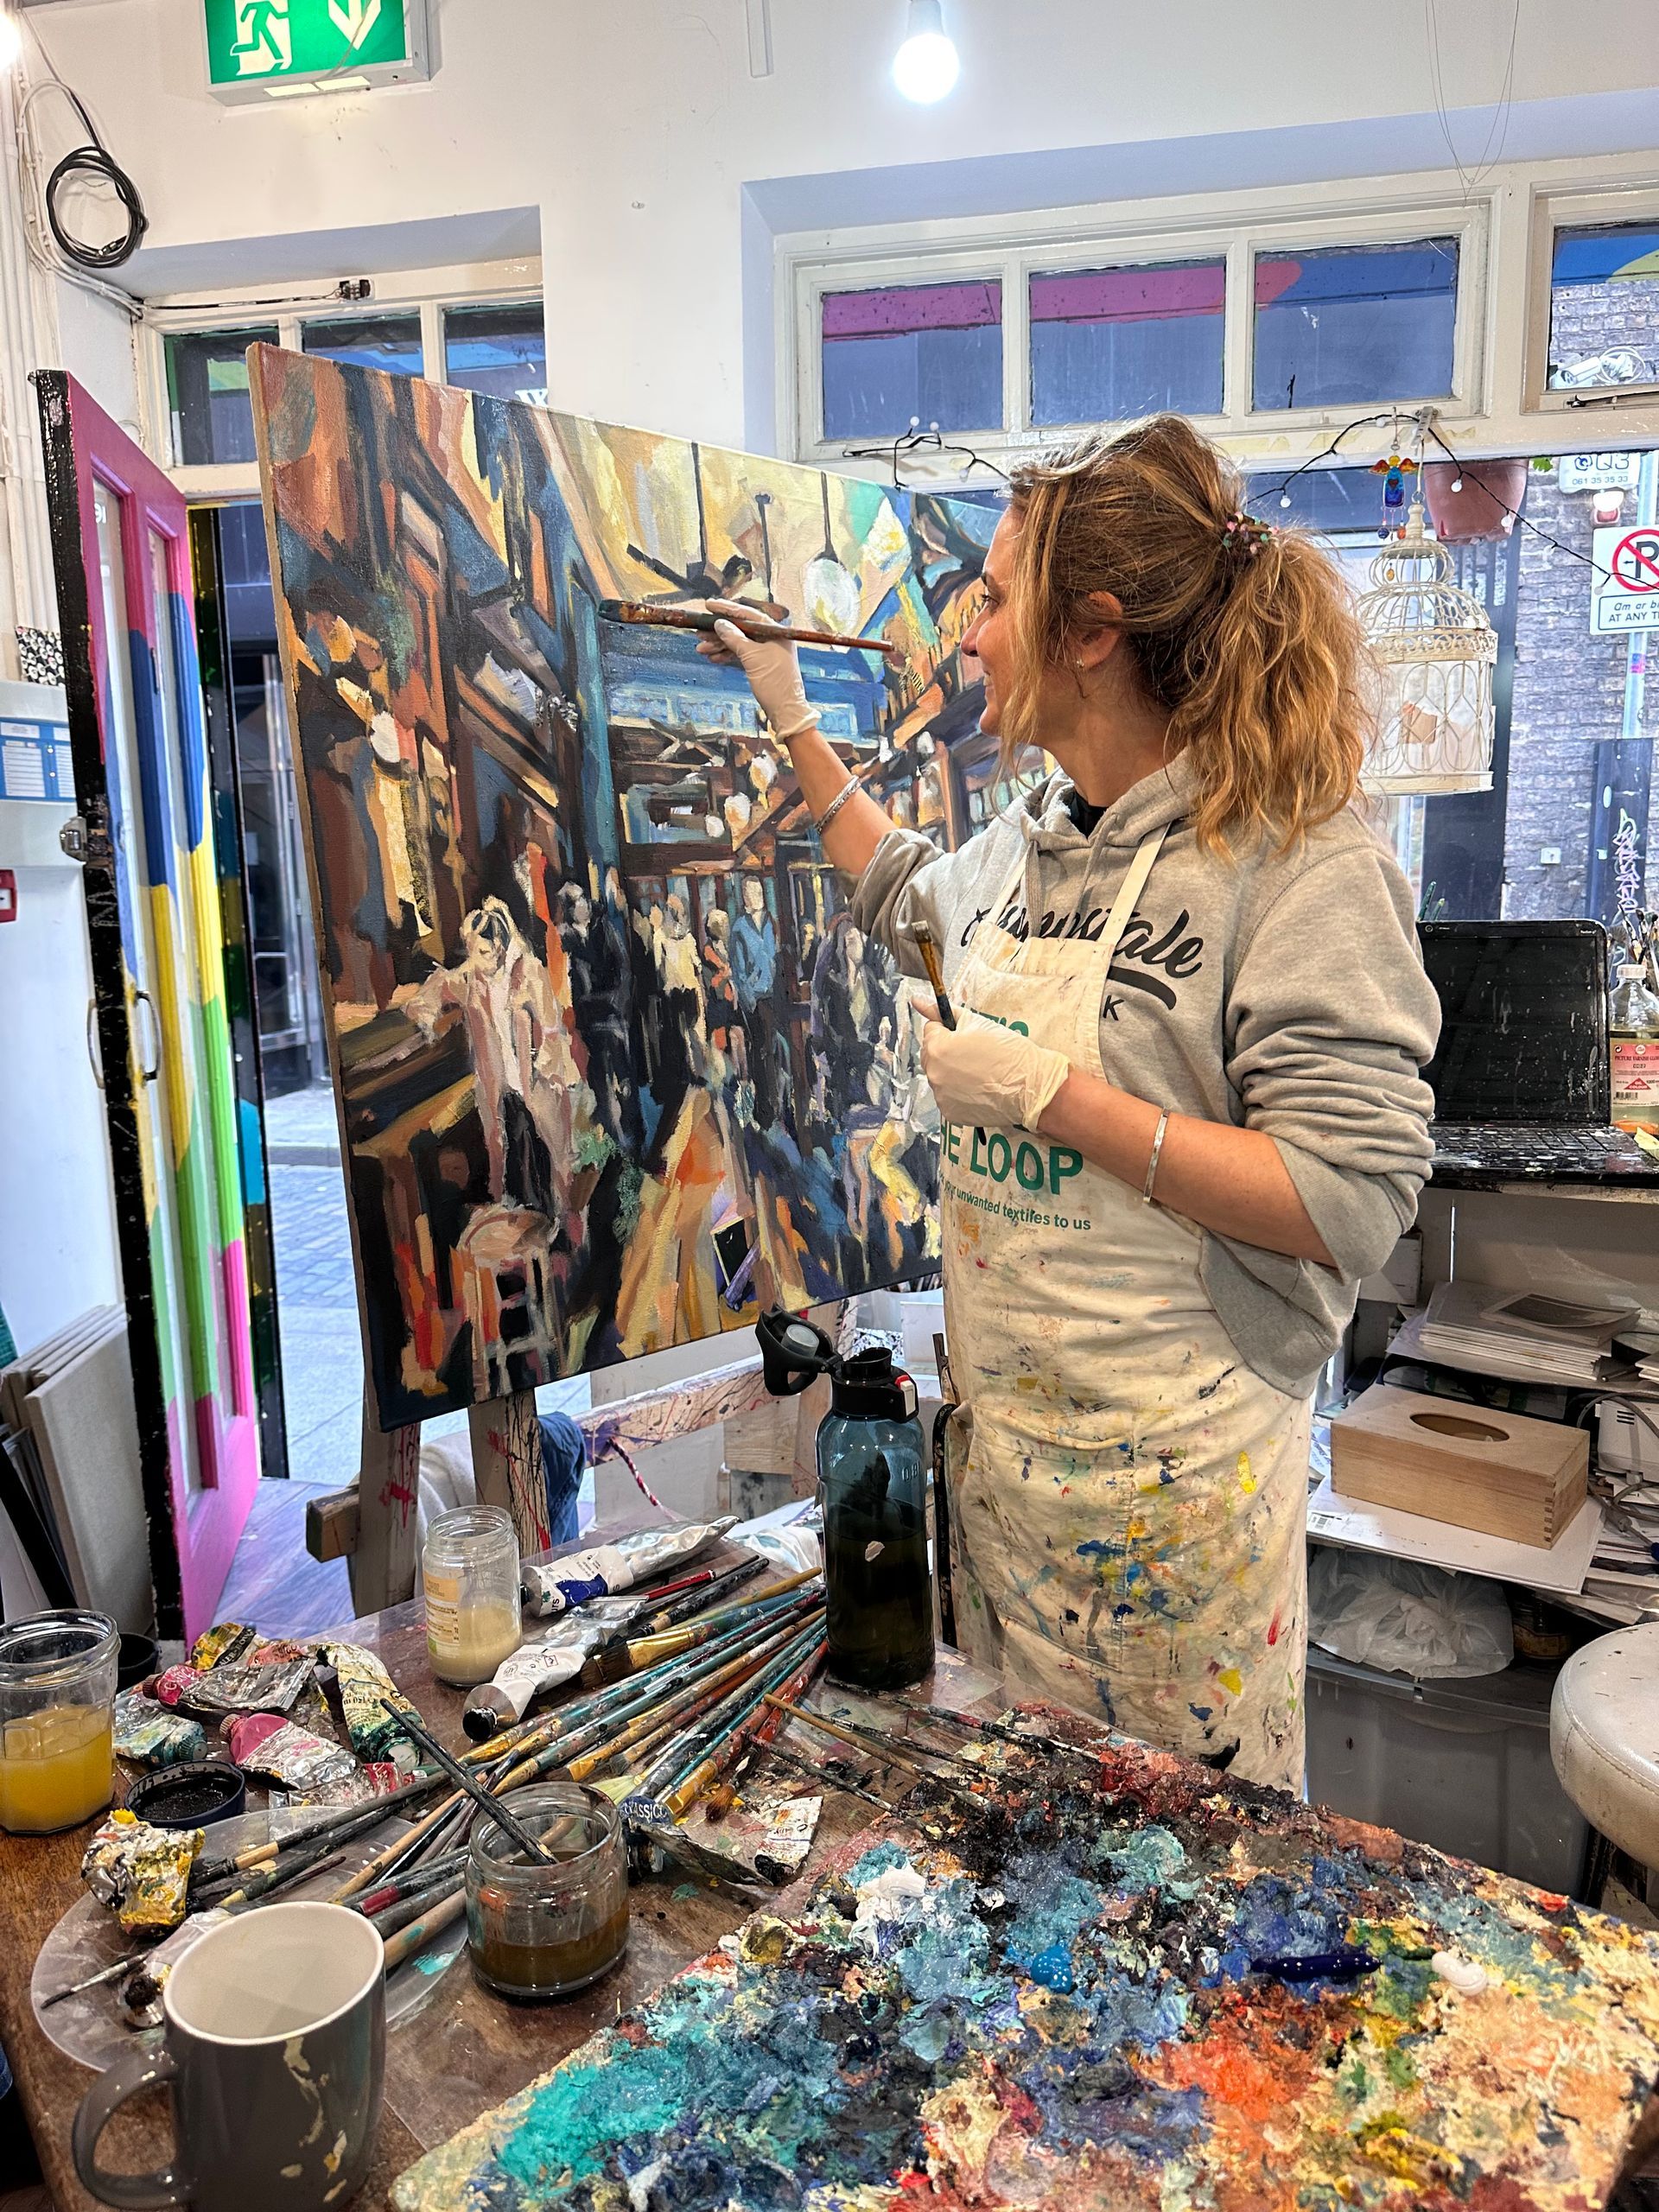 Aga Szot in her art studio. A white female working o a painting in oils with her palette and brushes in the foreground